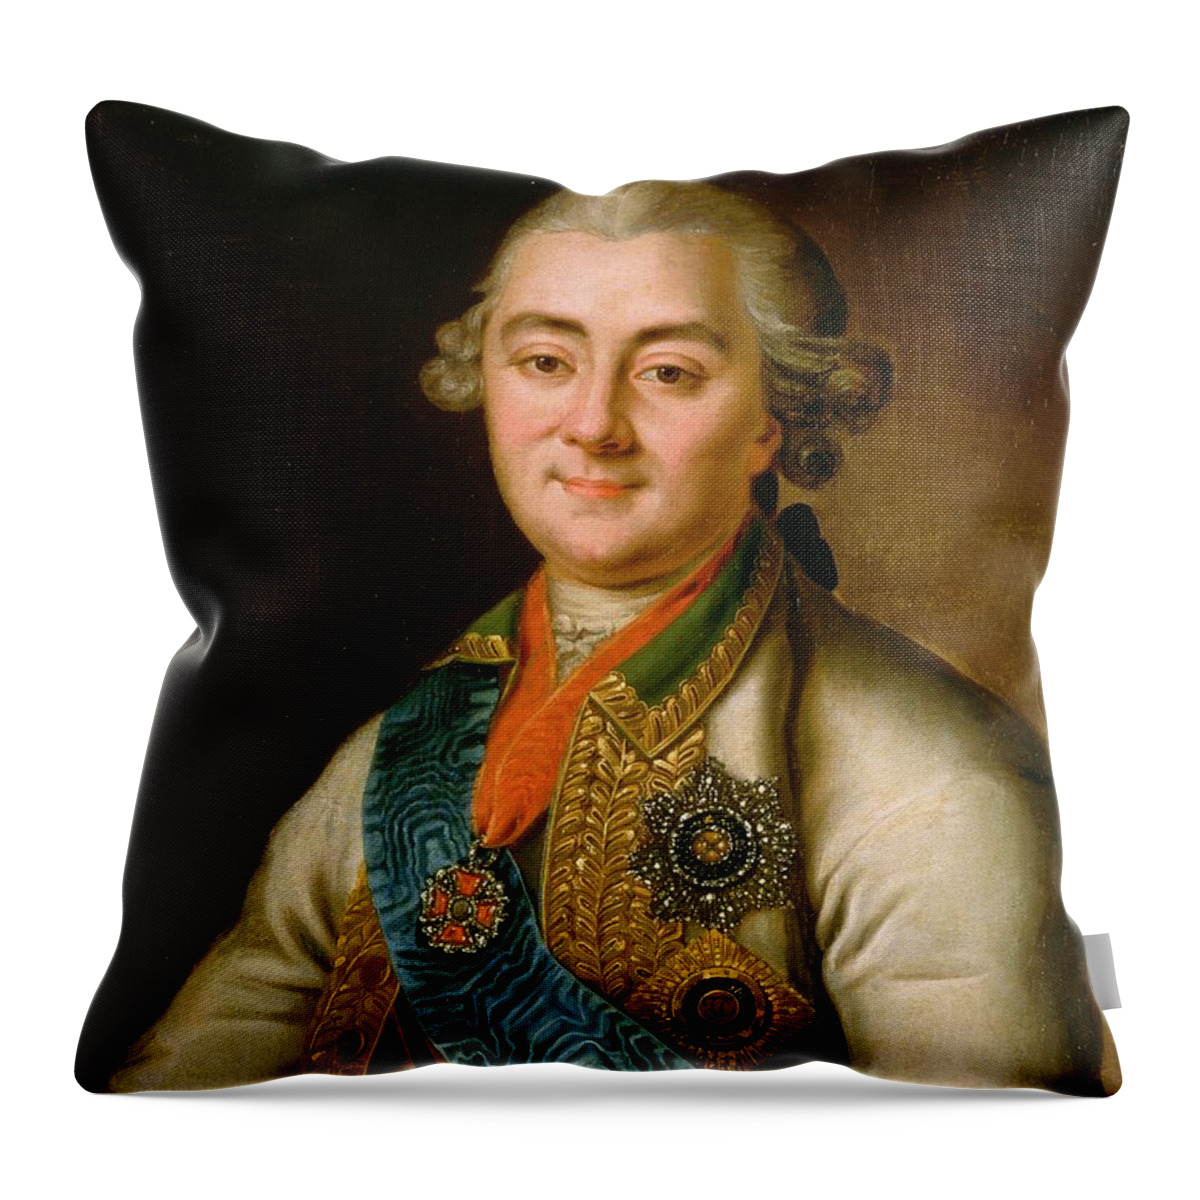 Lover Throw Pillow featuring the painting Portrait Of Count Alexei Grigorievich Orlov by Russian School